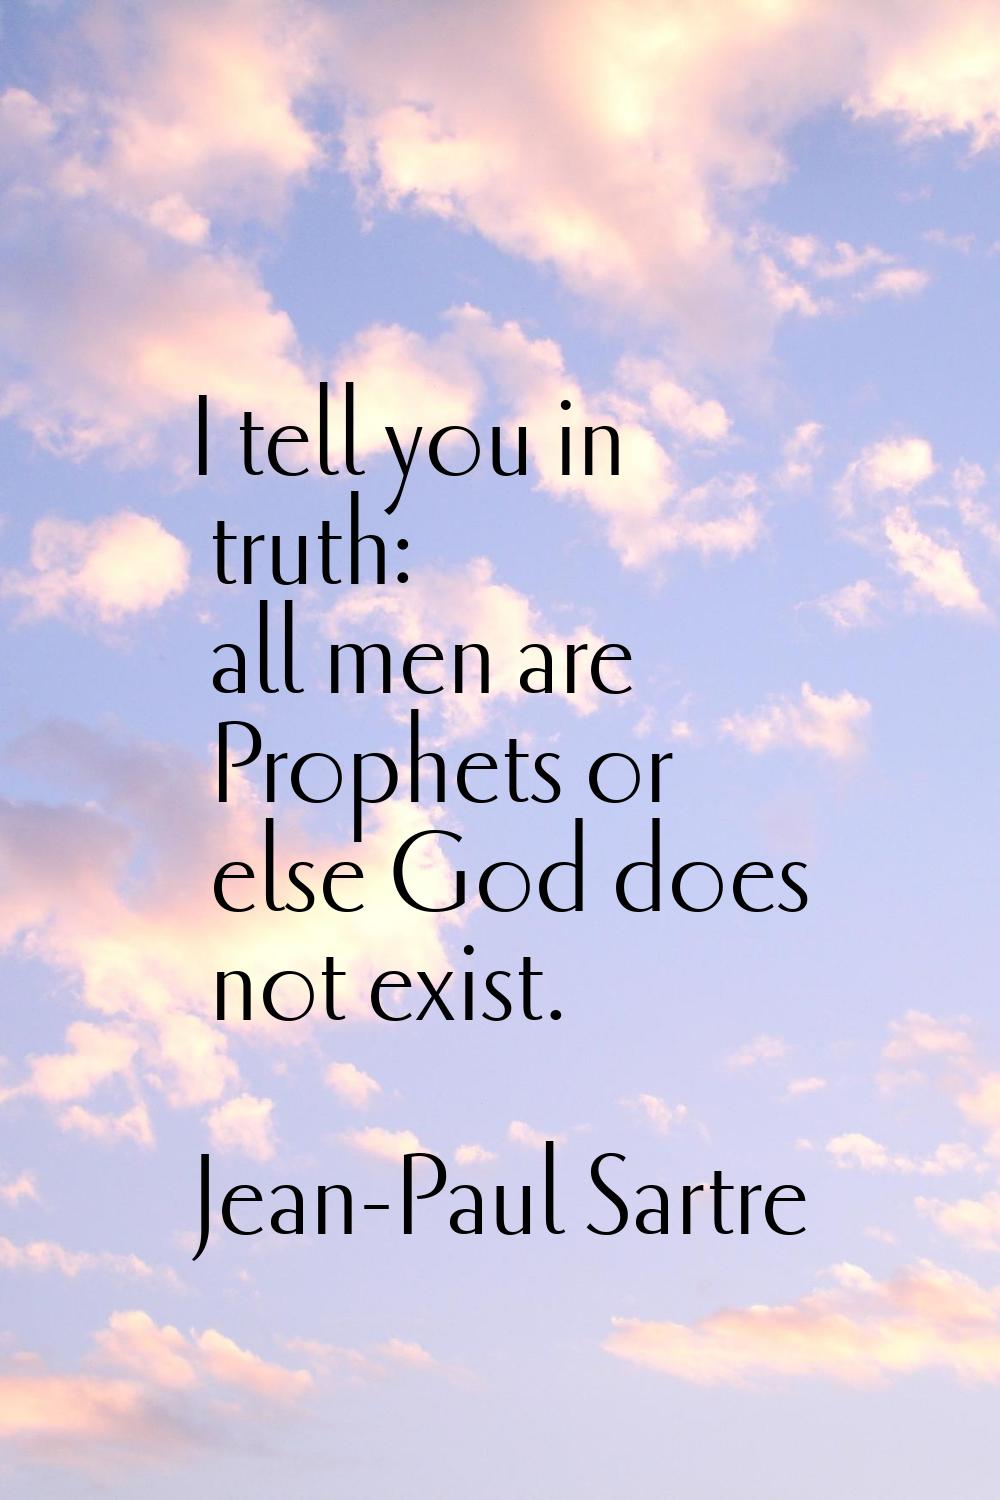 I tell you in truth: all men are Prophets or else God does not exist.